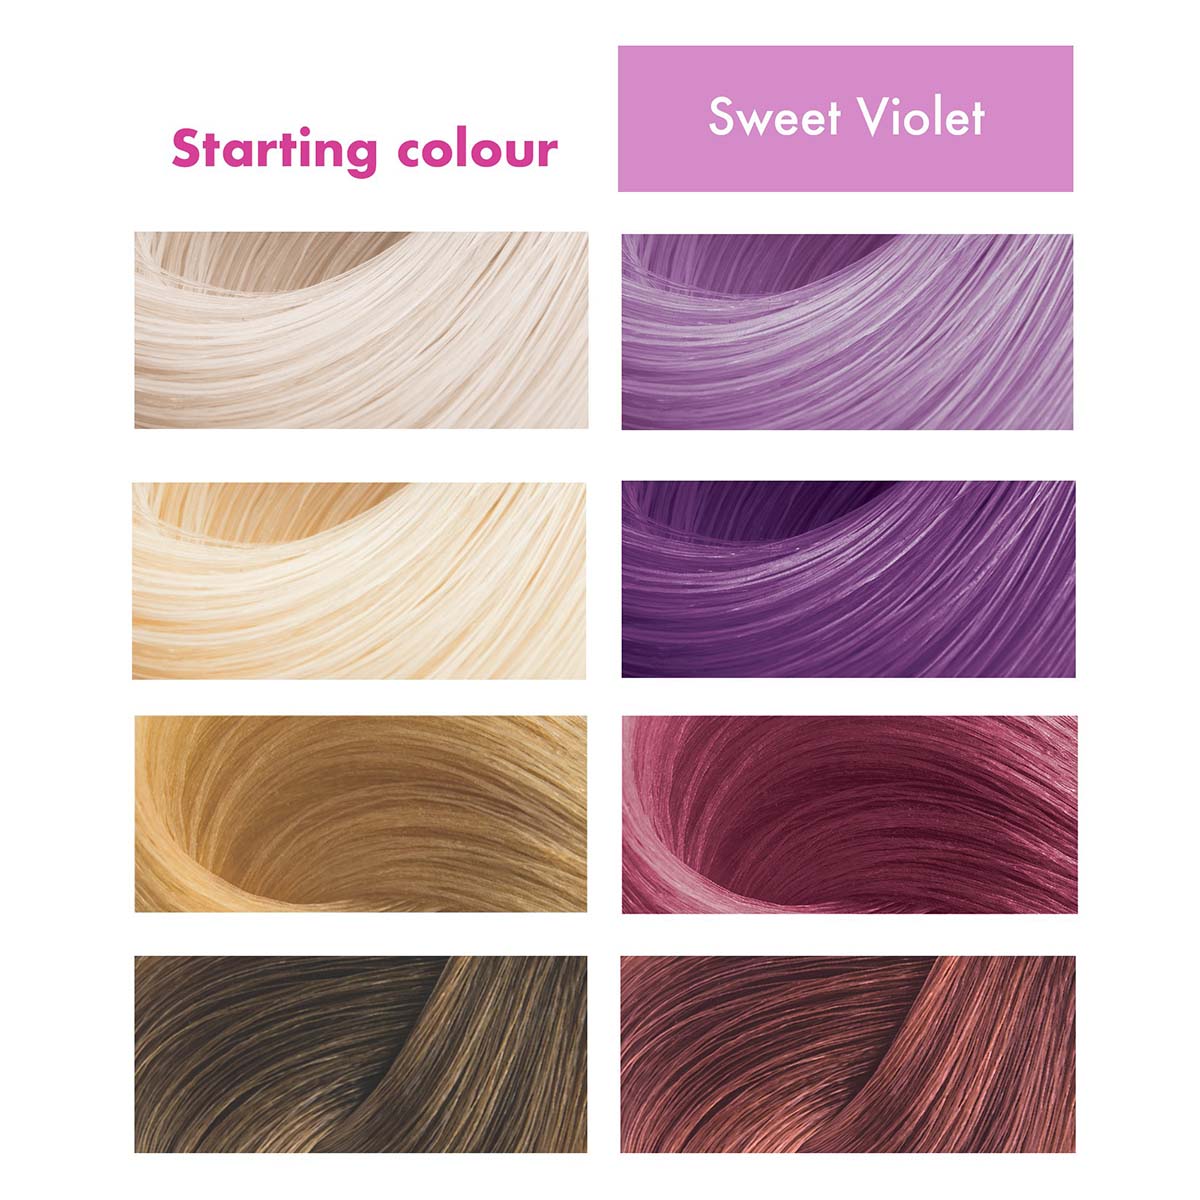 temporary colour mask sweet violet results